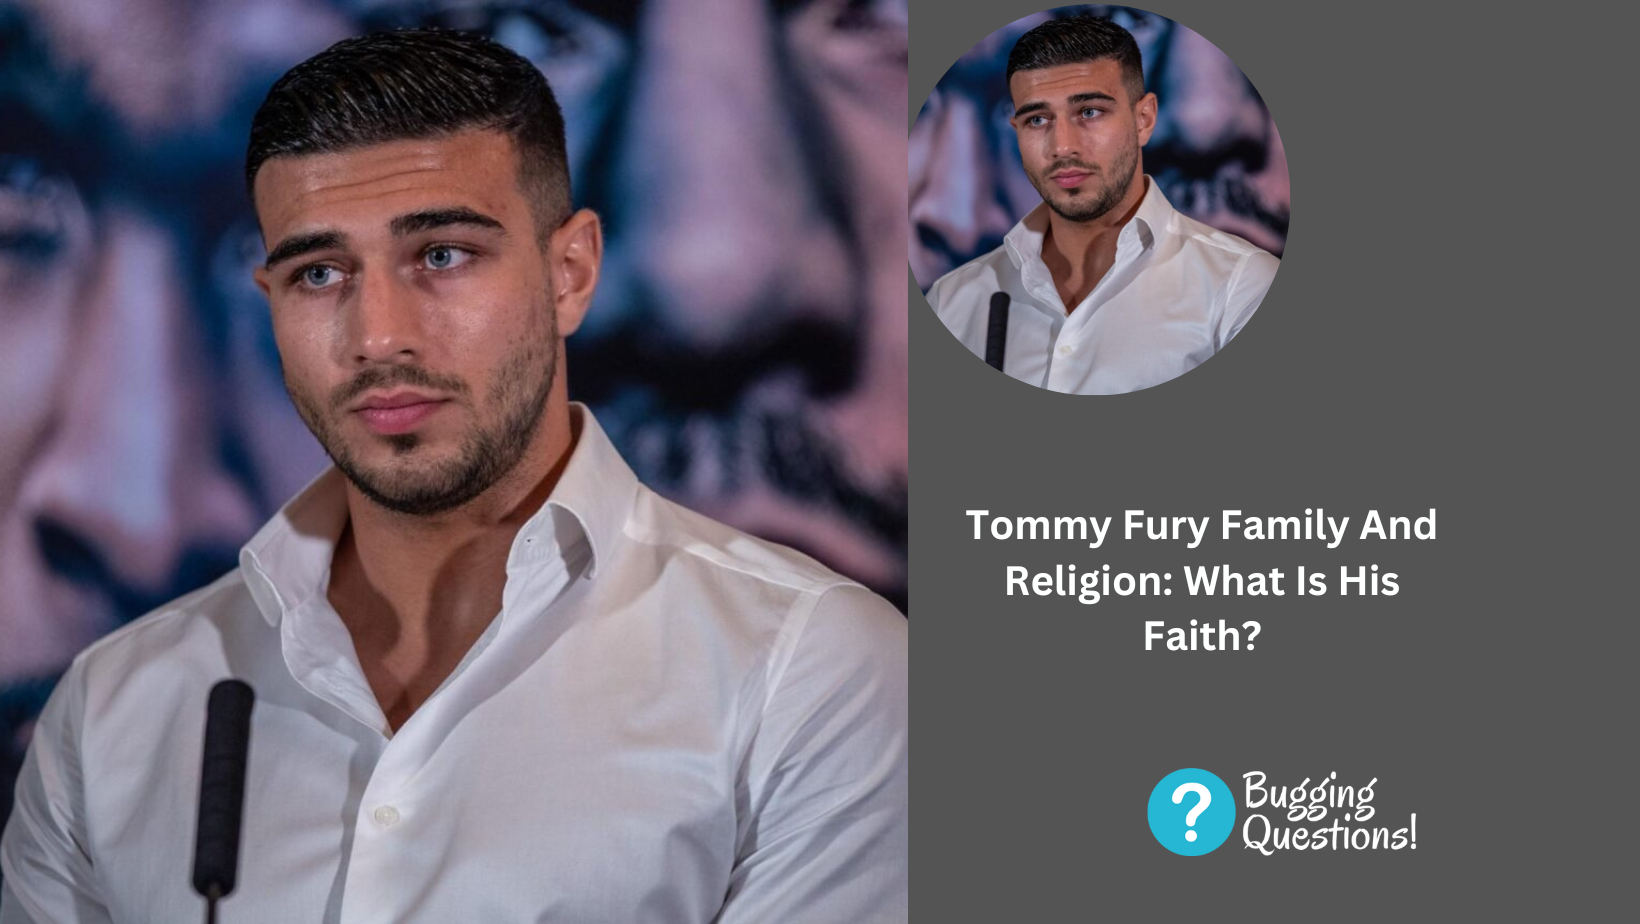 Tommy Fury Family And Religion: What Is His Faith?